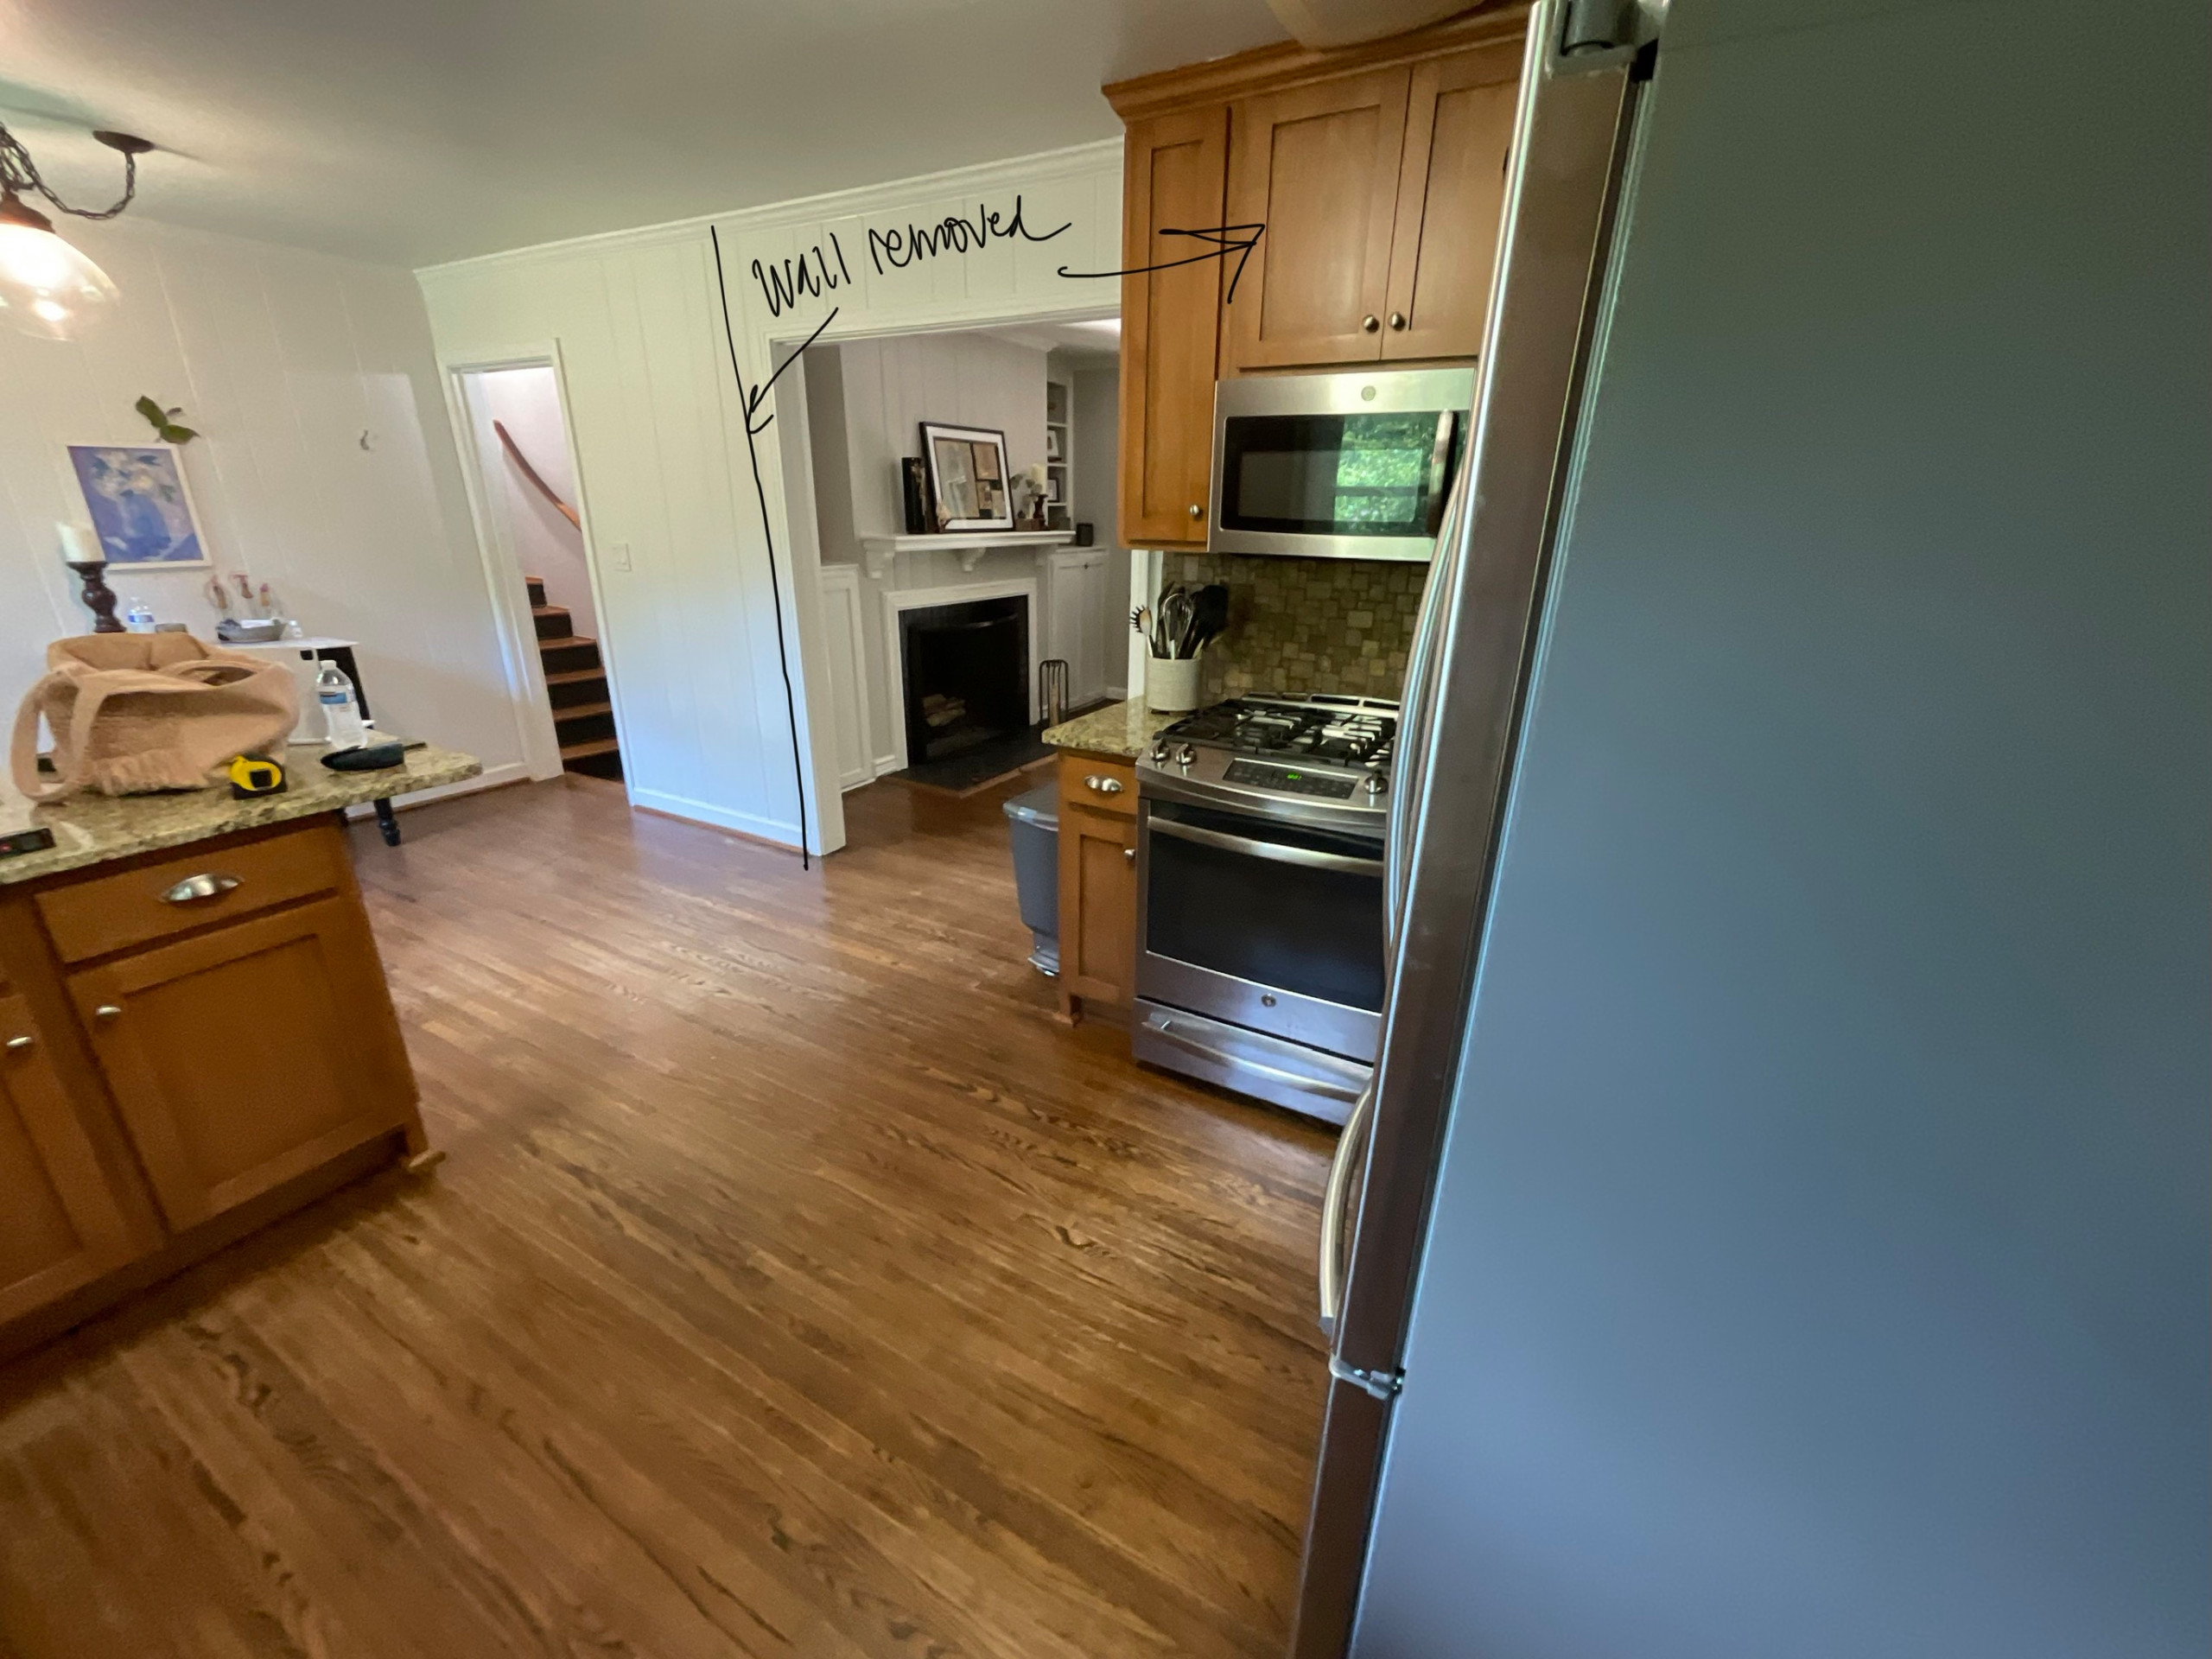 West Meade Kitchen and Den Reno